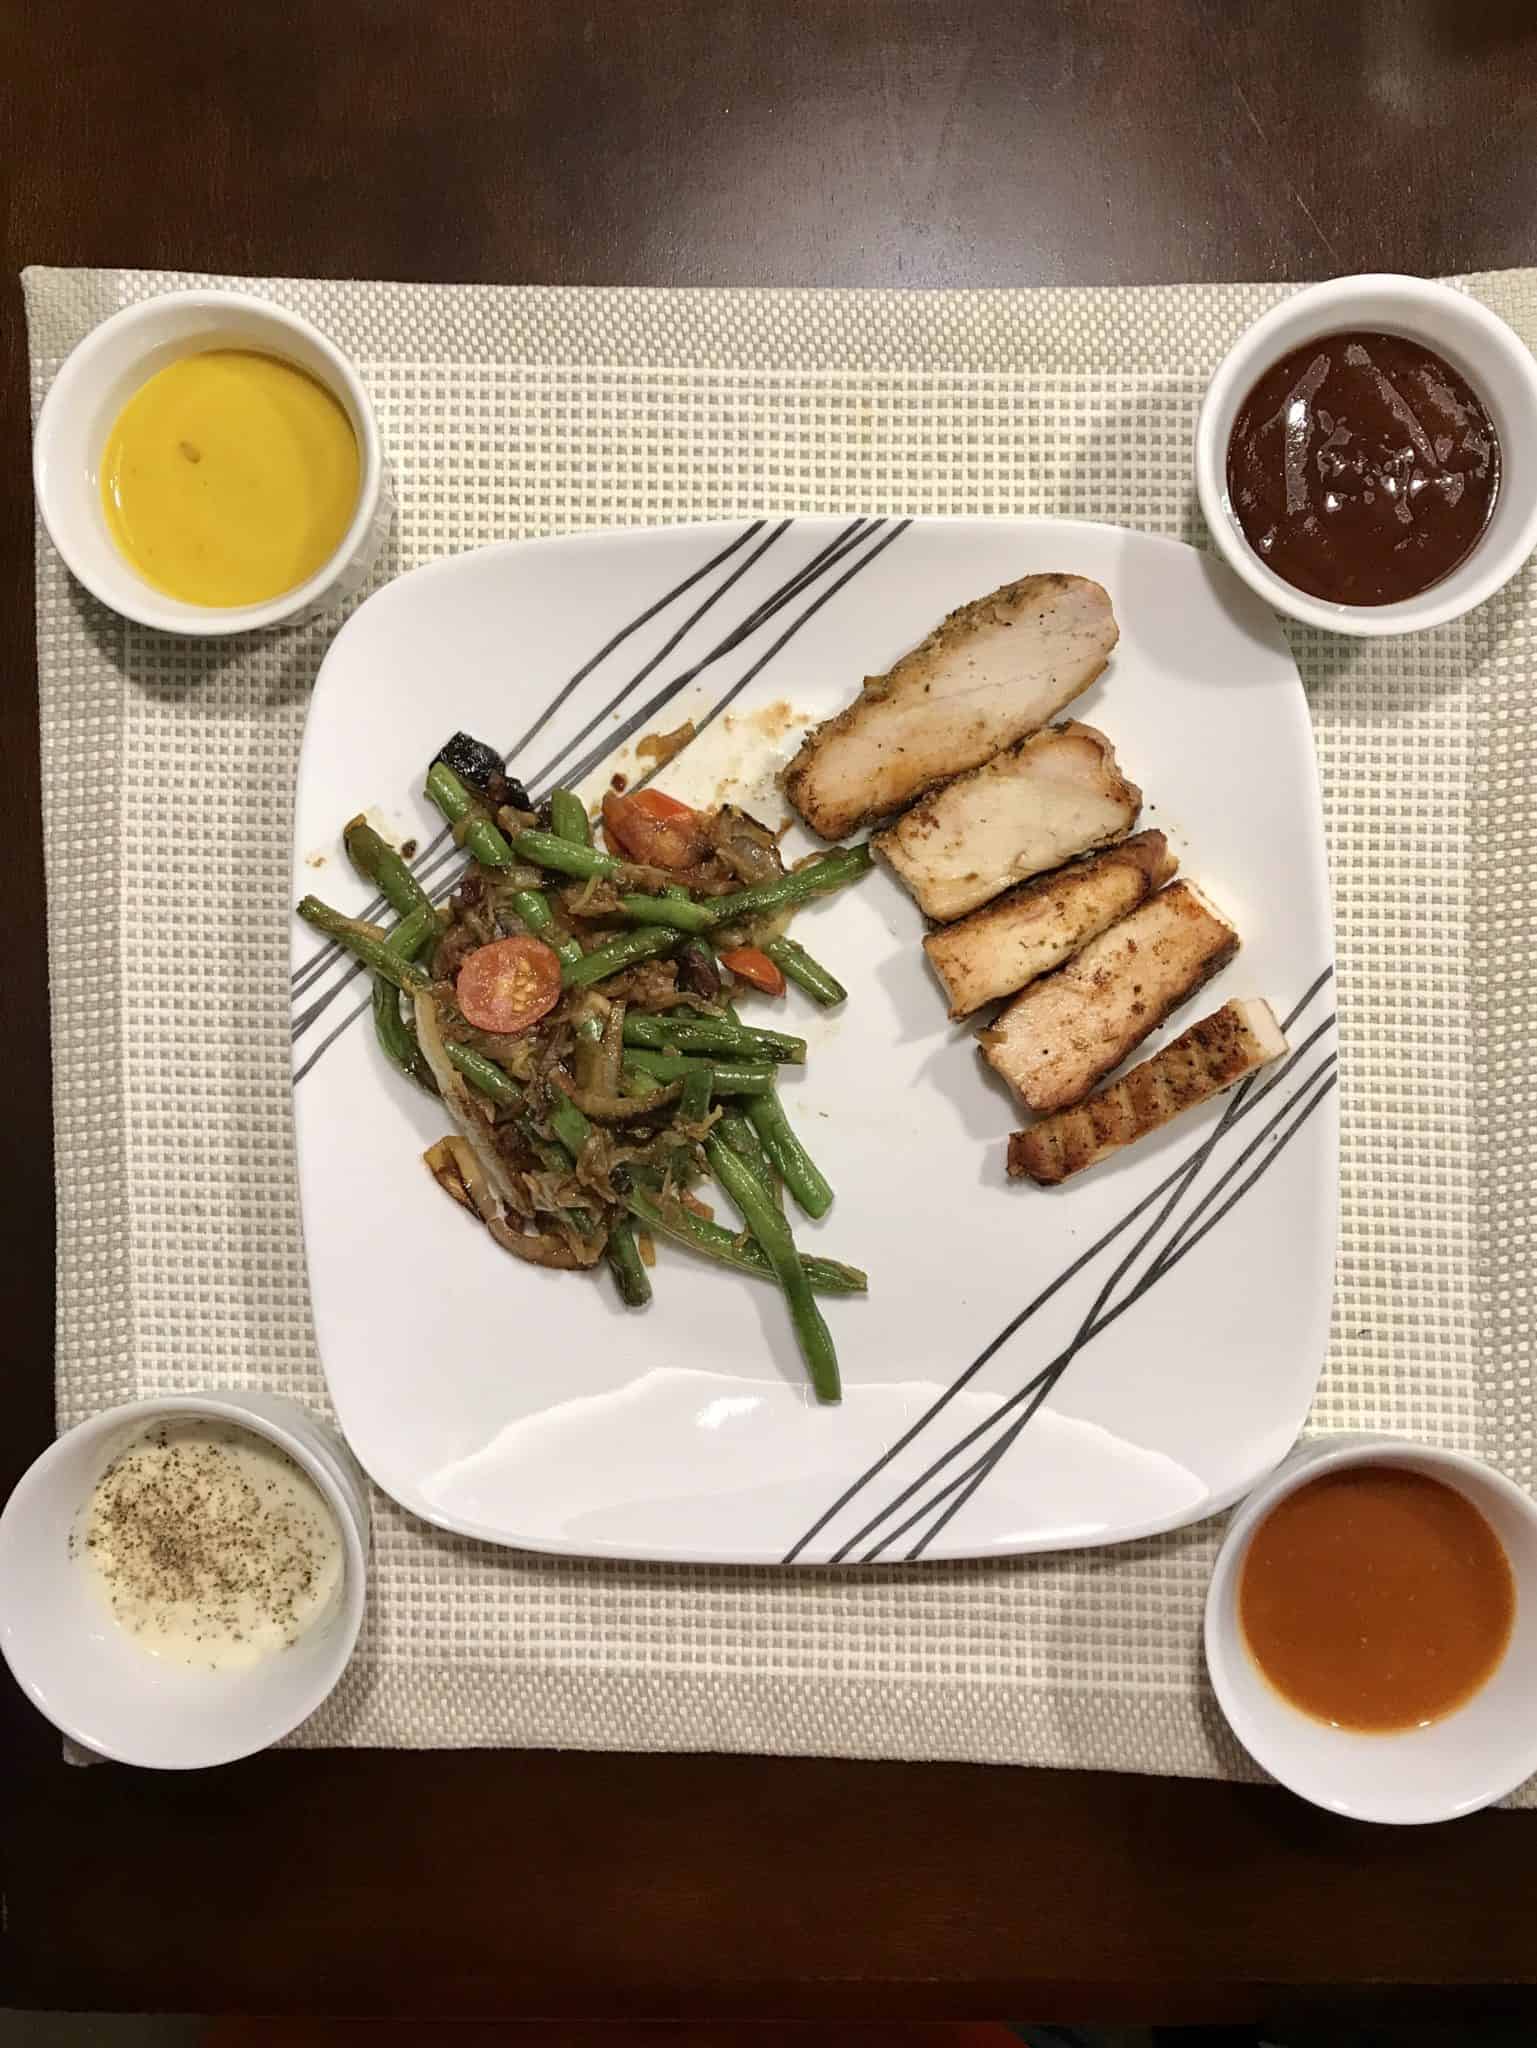 Chicken breast served on white plate with vegetables and 4 different sauces